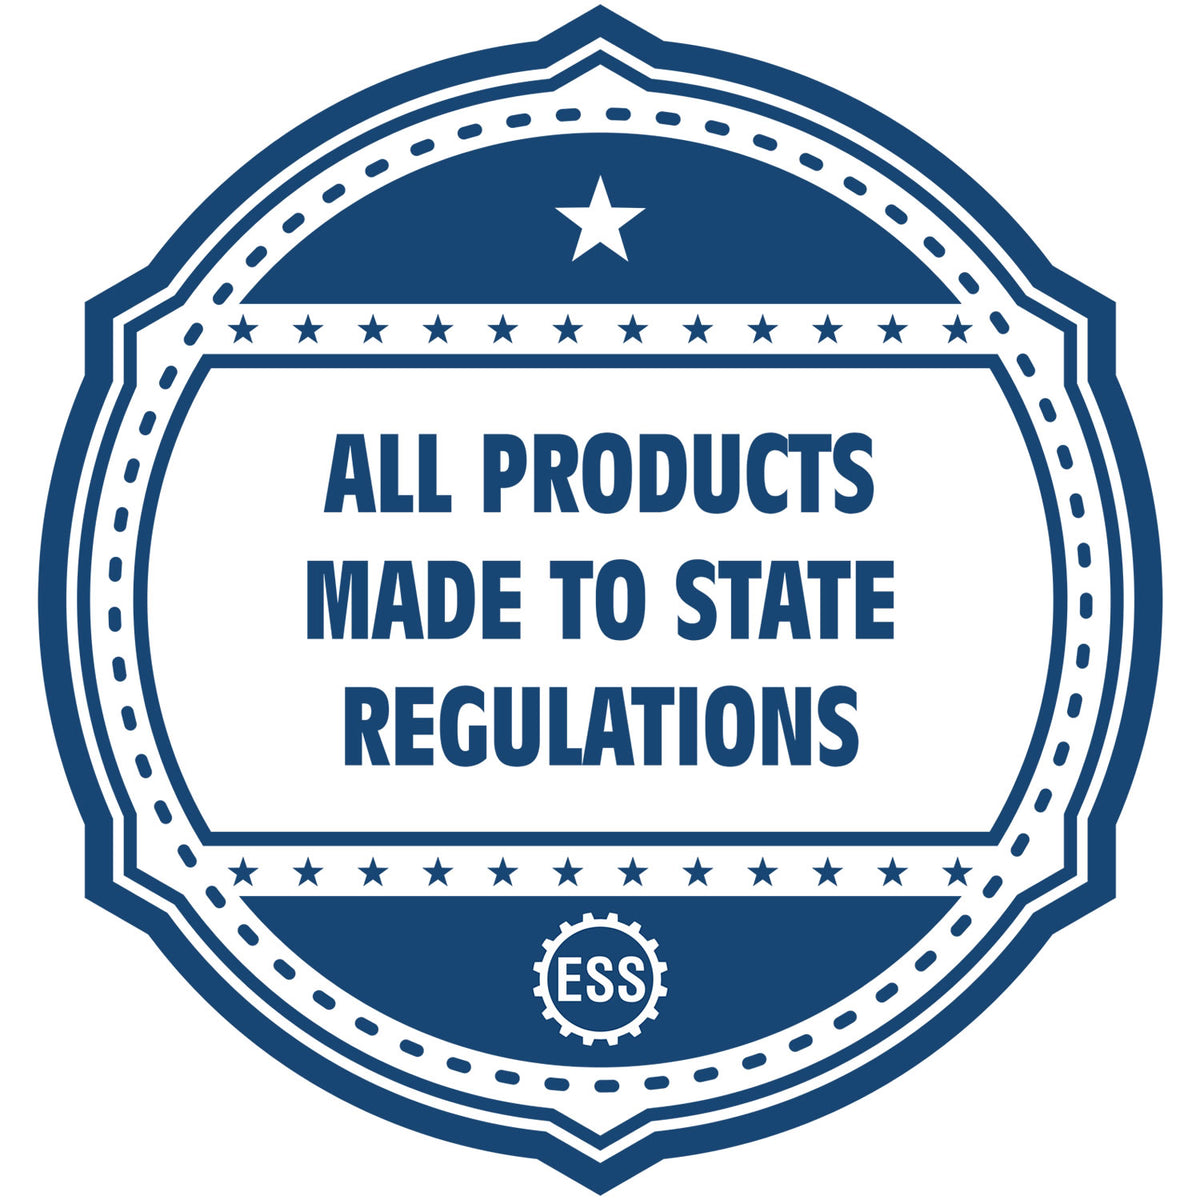 An icon or badge element for the Alaska Engineer Desk Seal showing that this product is made in compliance with state regulations.